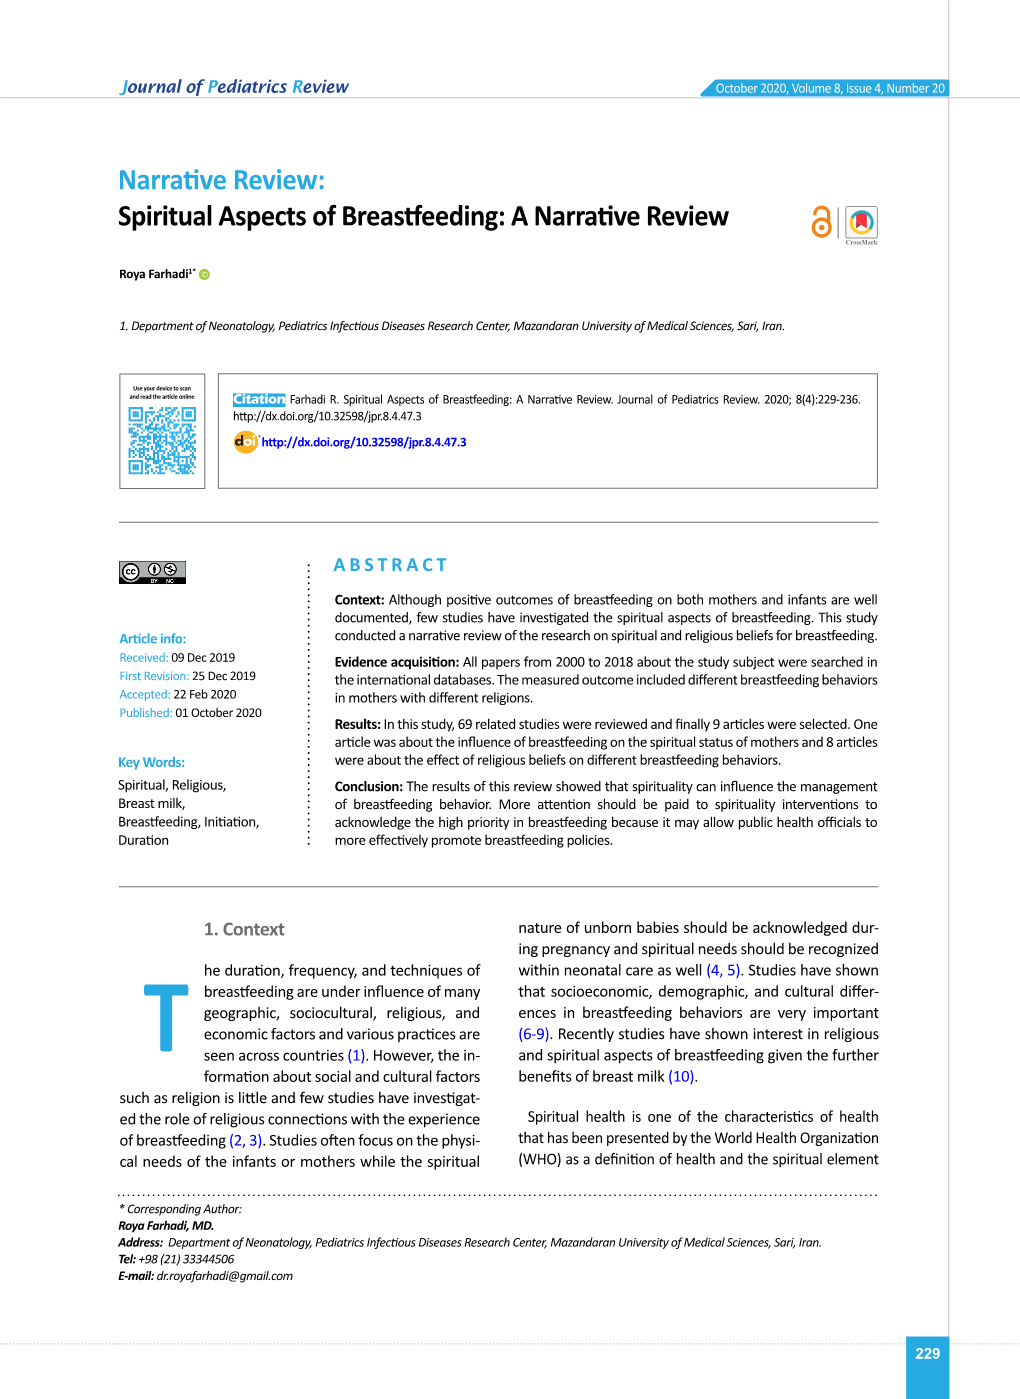 Spiritual Aspects of Breastfeeding: a Narrative Review